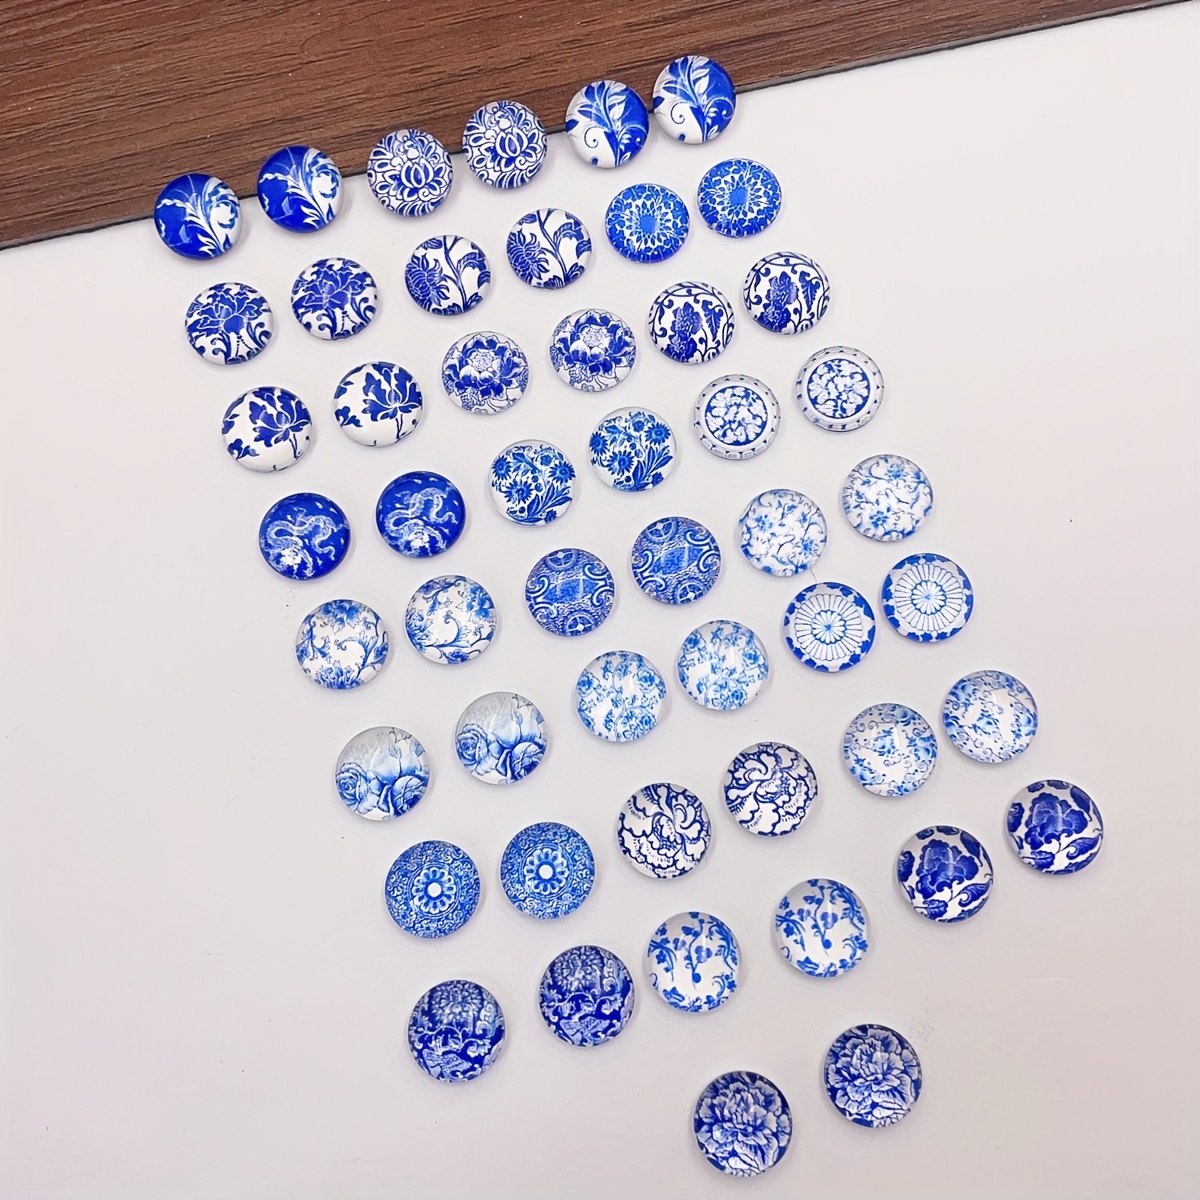 

50pcs 25pairs 12mm Mix Styles Porcelain Glass Cabochons Diy Special Jewelry Making Decorative Accessories